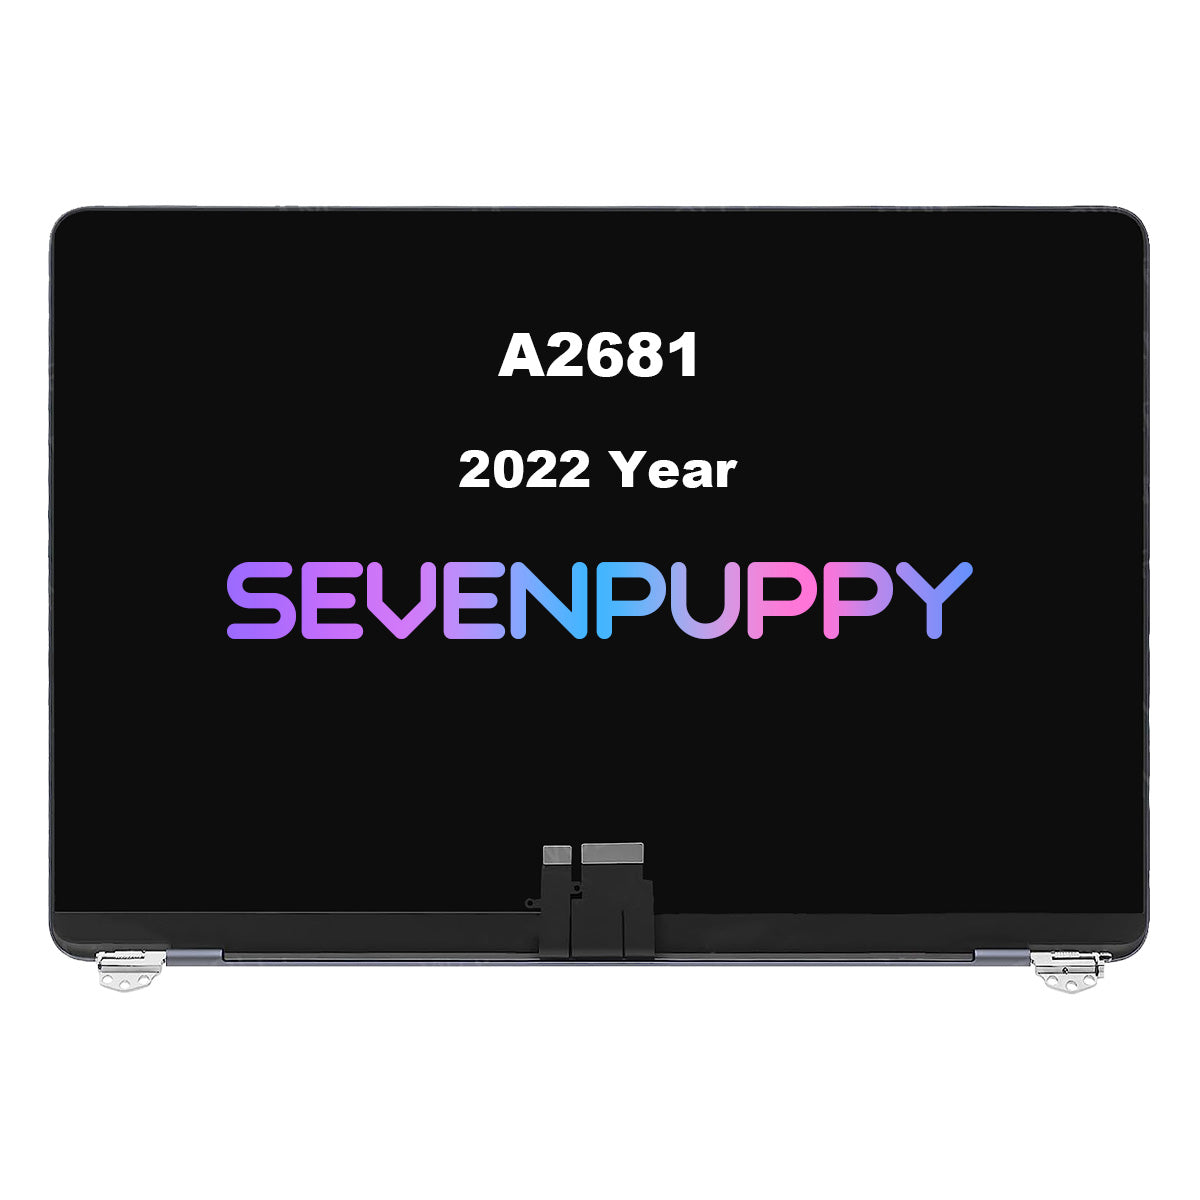 SEVEN PUPPY Brand NEW For MacBook Air Retina 13“ M1 M2 A2681 2022 Year Retina Full LCD Display Screen Assembly Replacement